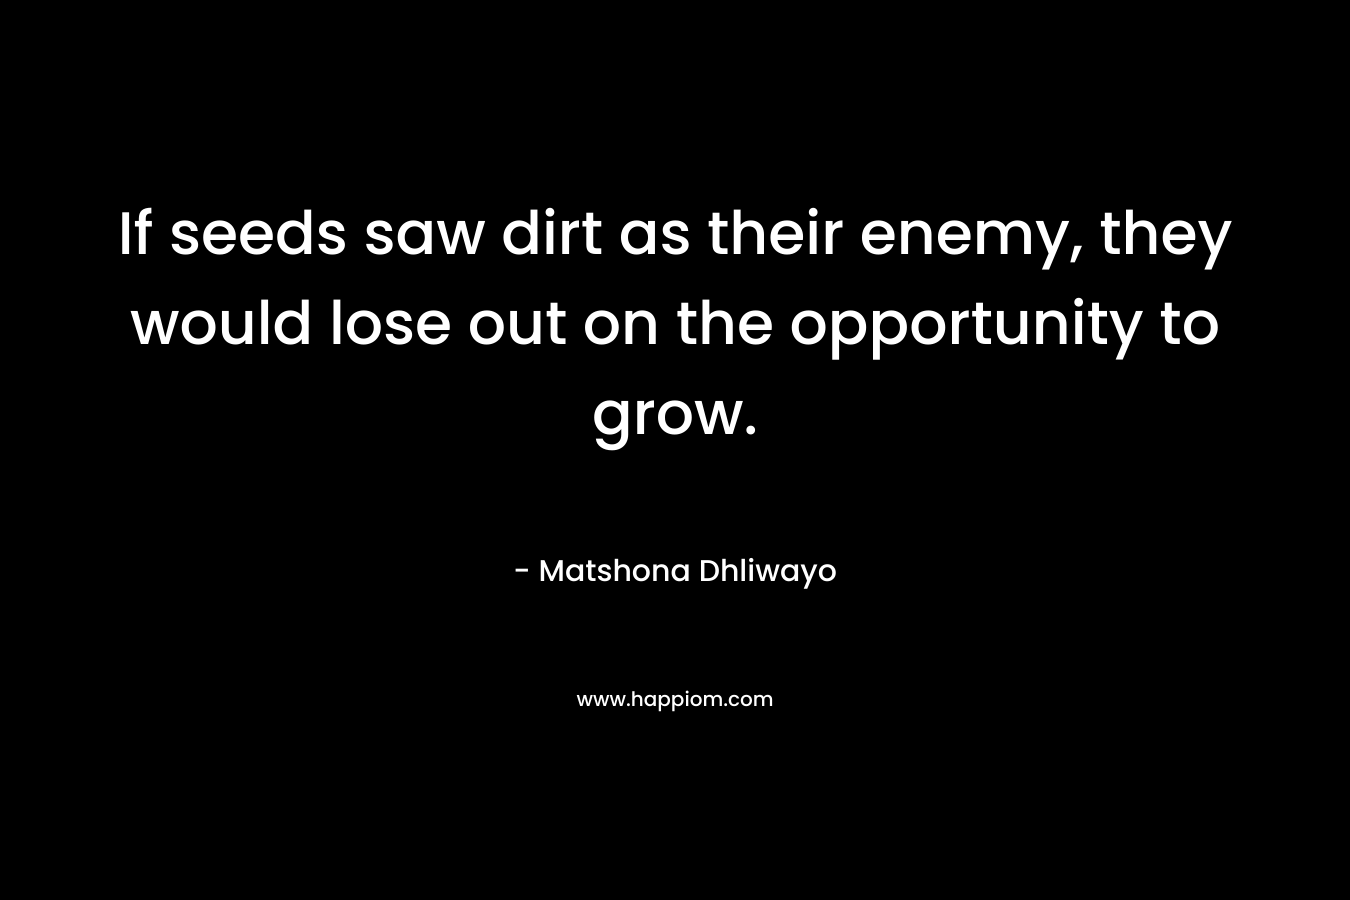 If seeds saw dirt as their enemy, they would lose out on the opportunity to grow. – Matshona Dhliwayo